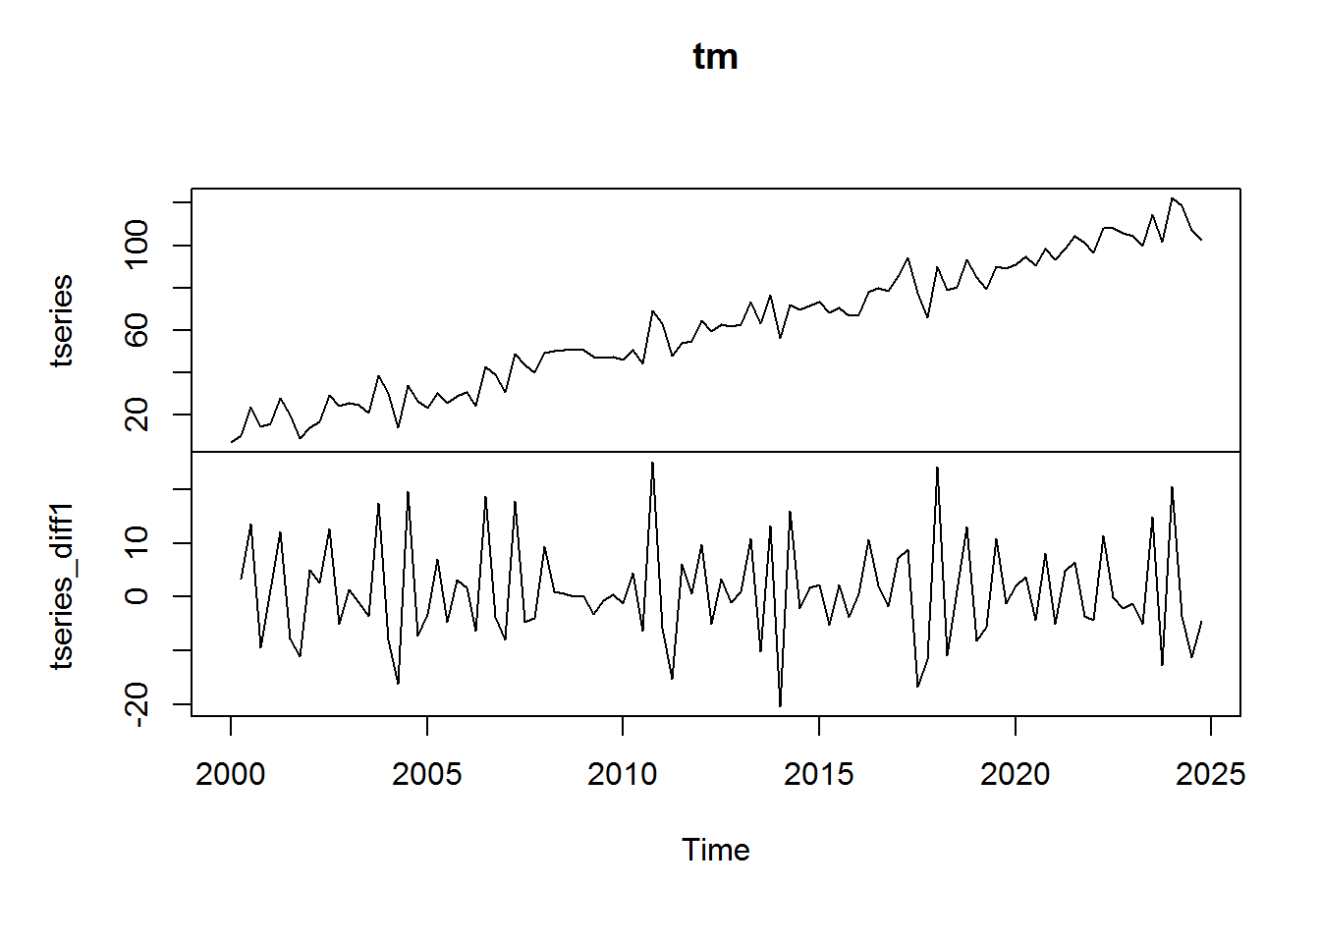 diagrammatic presentation of time series data is known as